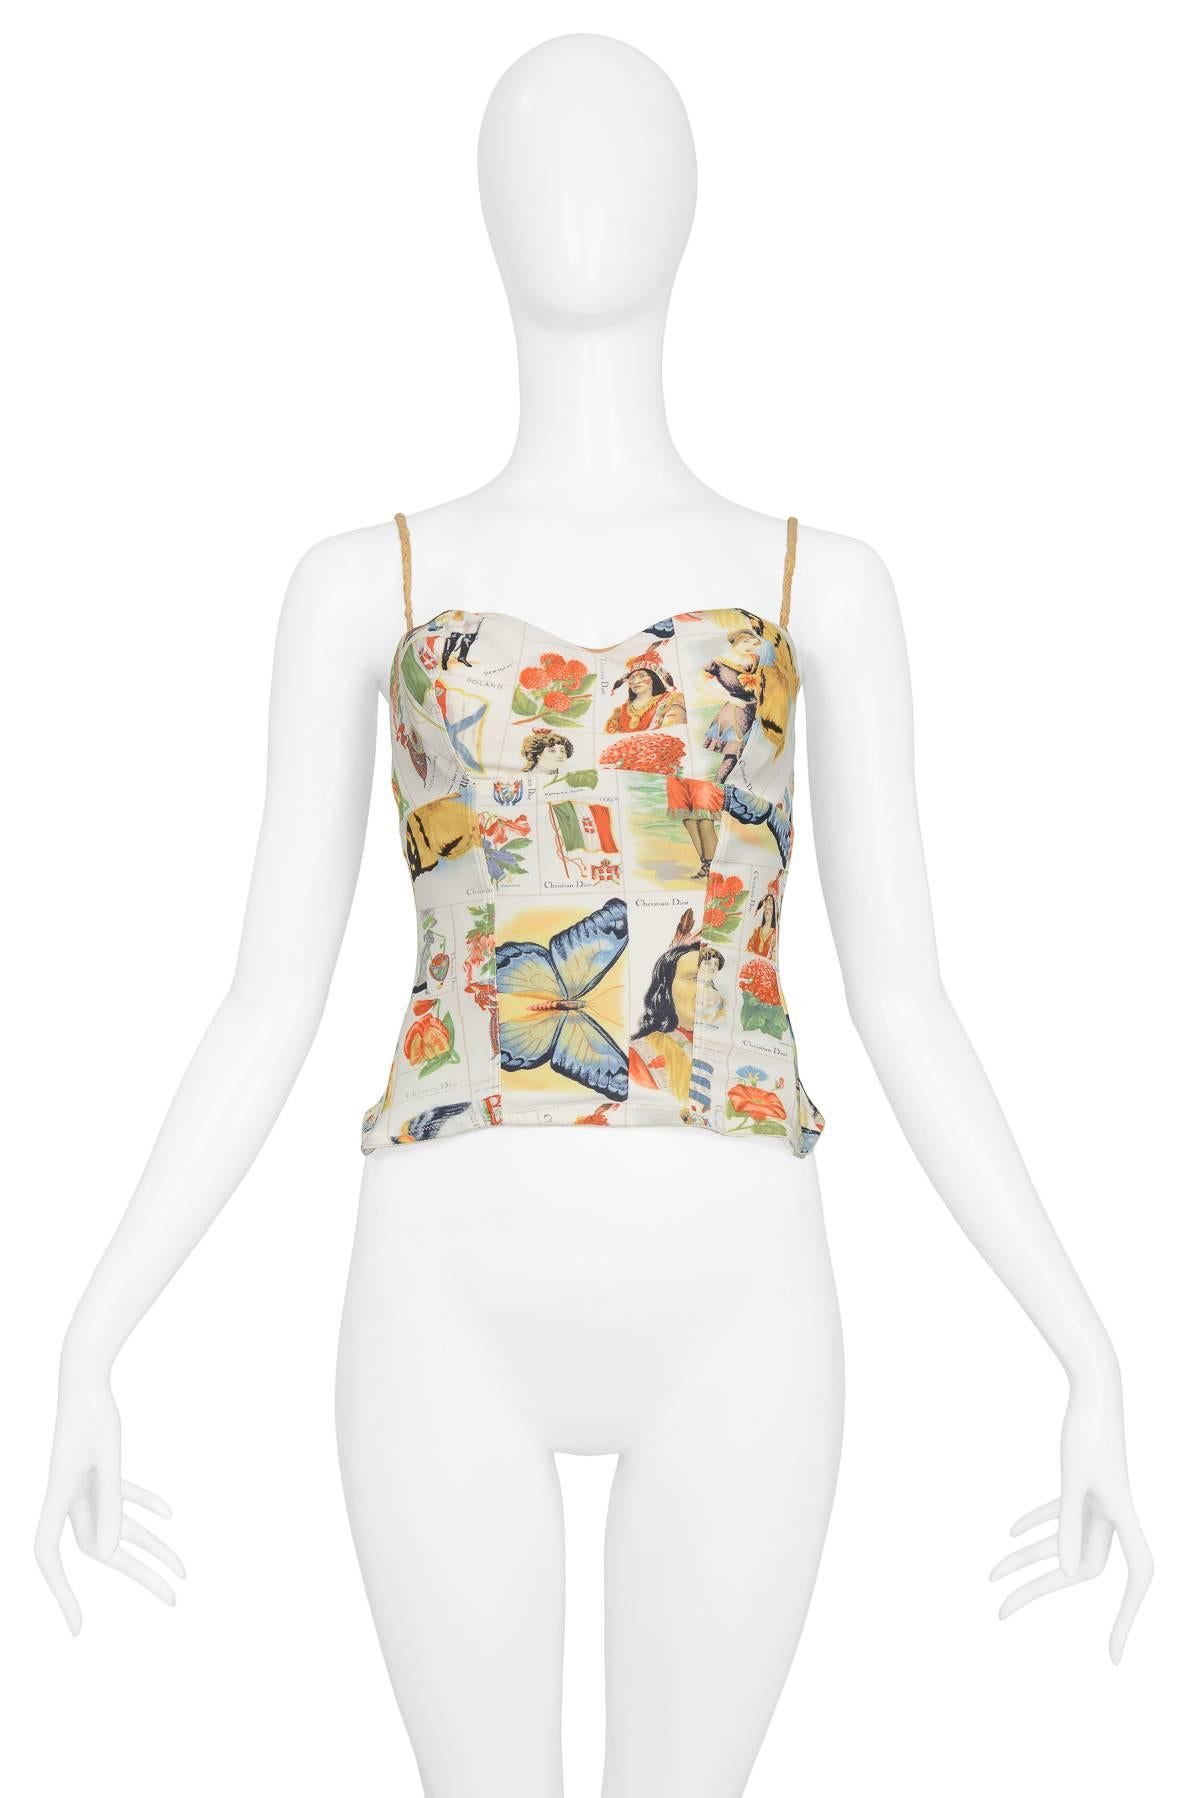 Christian Dior by John Galliano ivory corseted bustier with stamp print throughout and braided suede lace-up closure at back. This piece features removable straps for a strapless option.

Excellent Condition.

Size: 36
